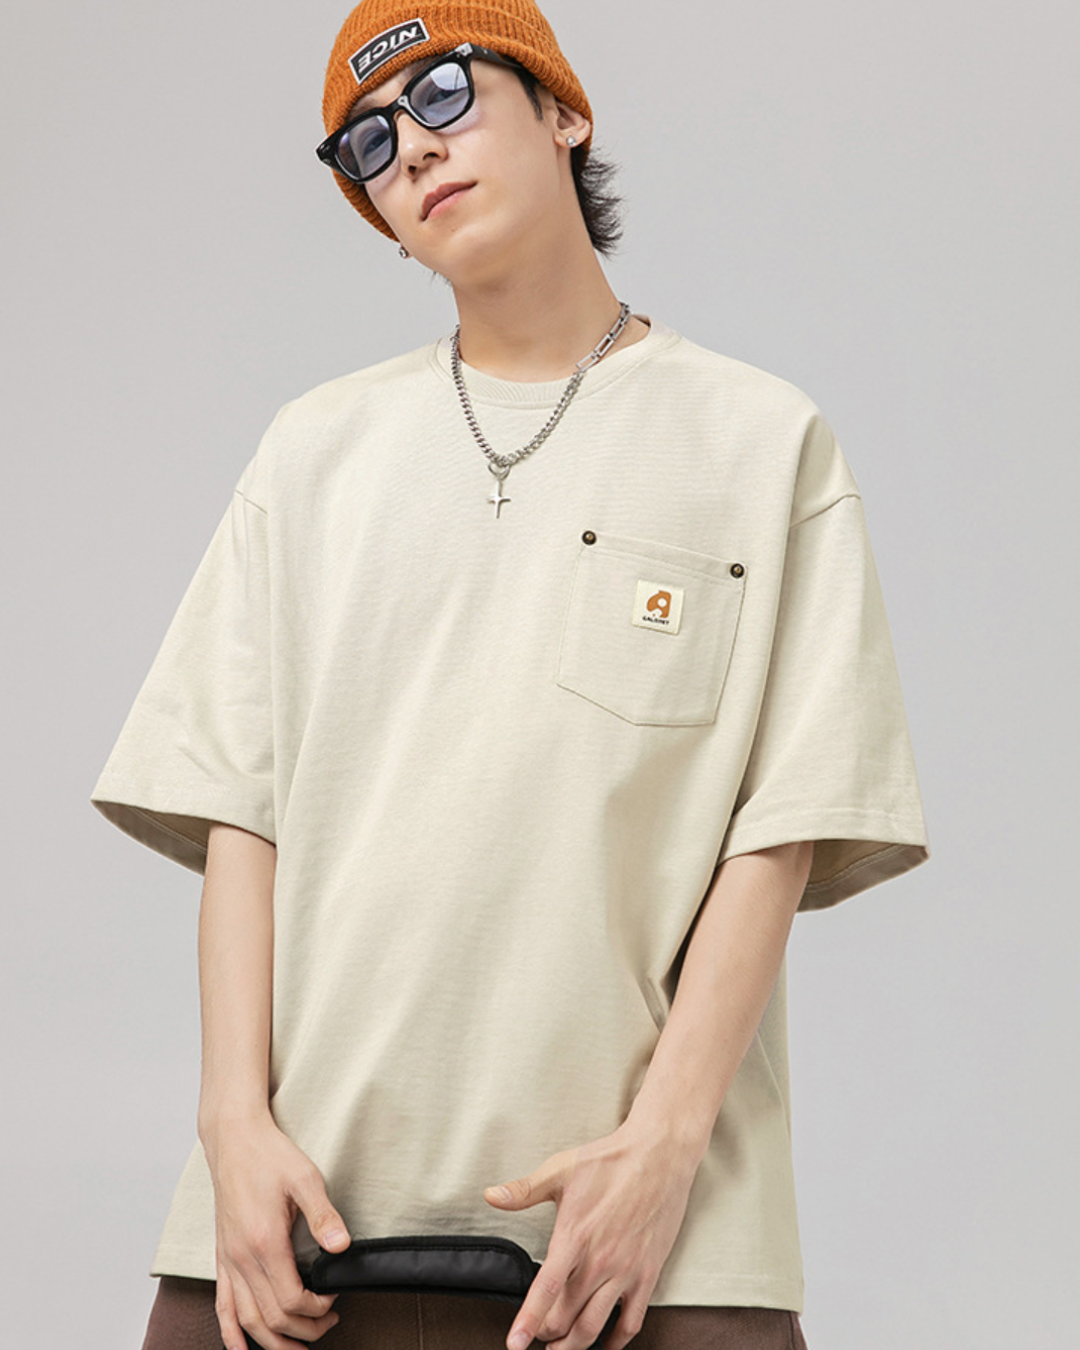 Pocketed Oversized Vintage Tee in Beige (Size L)